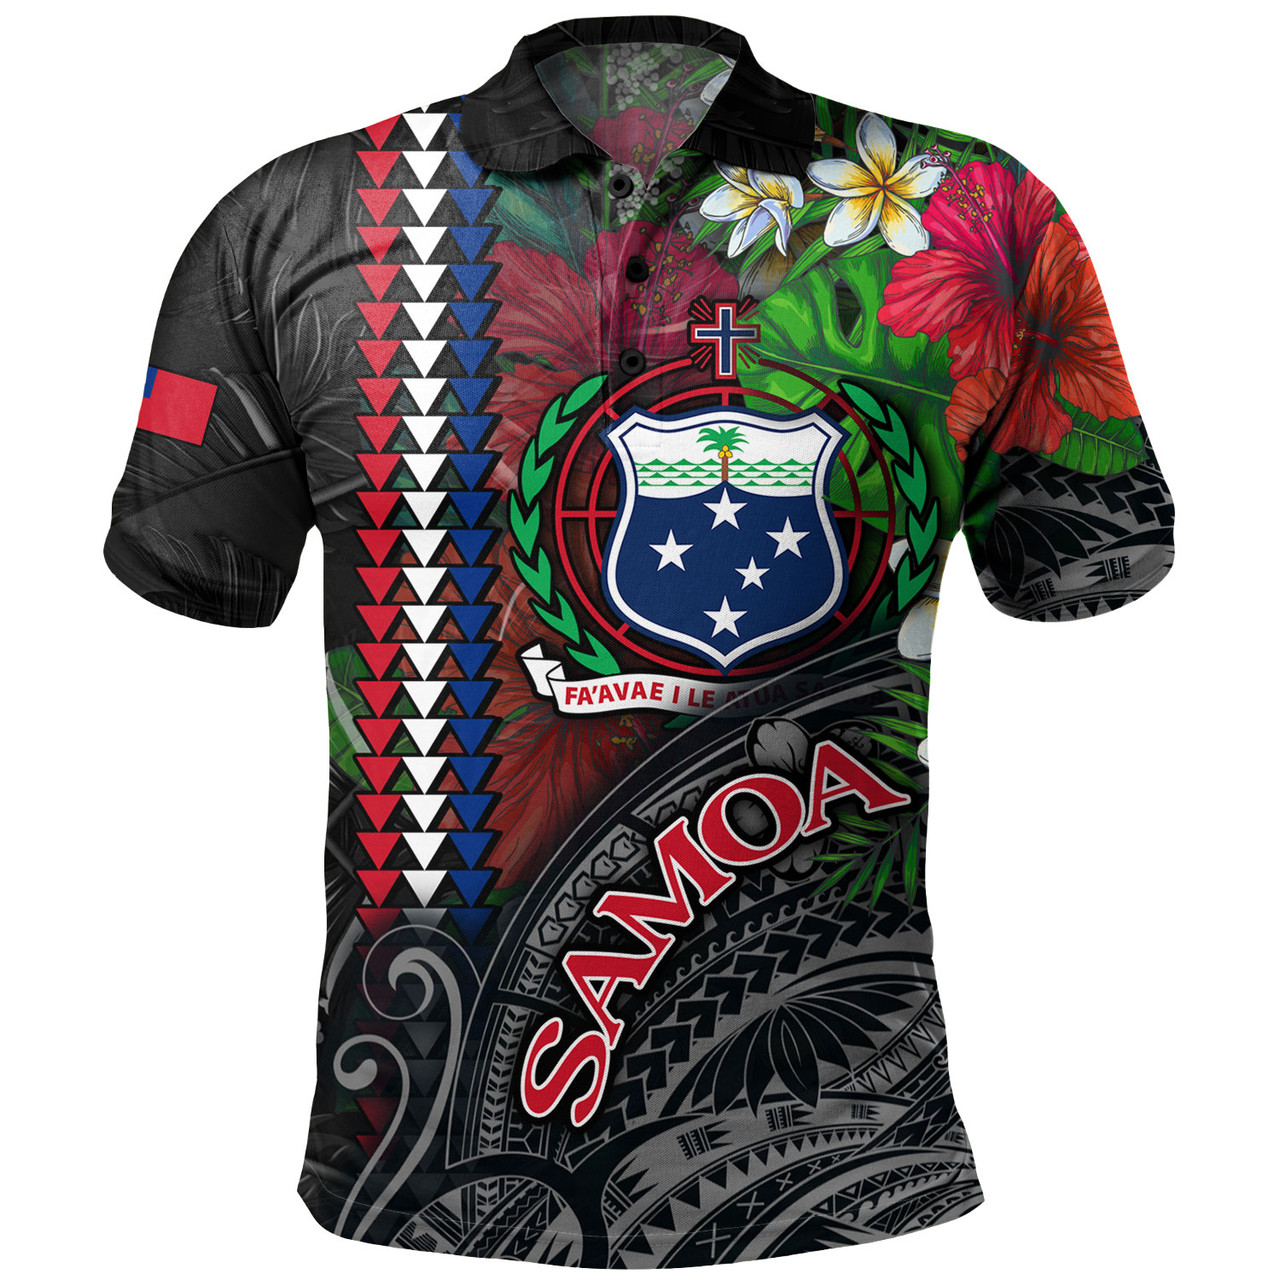 Samoa Custom Personalised Polo Shirt Samoa Seal Hibiscus And Plumeria With Palm Branches Vintage Style